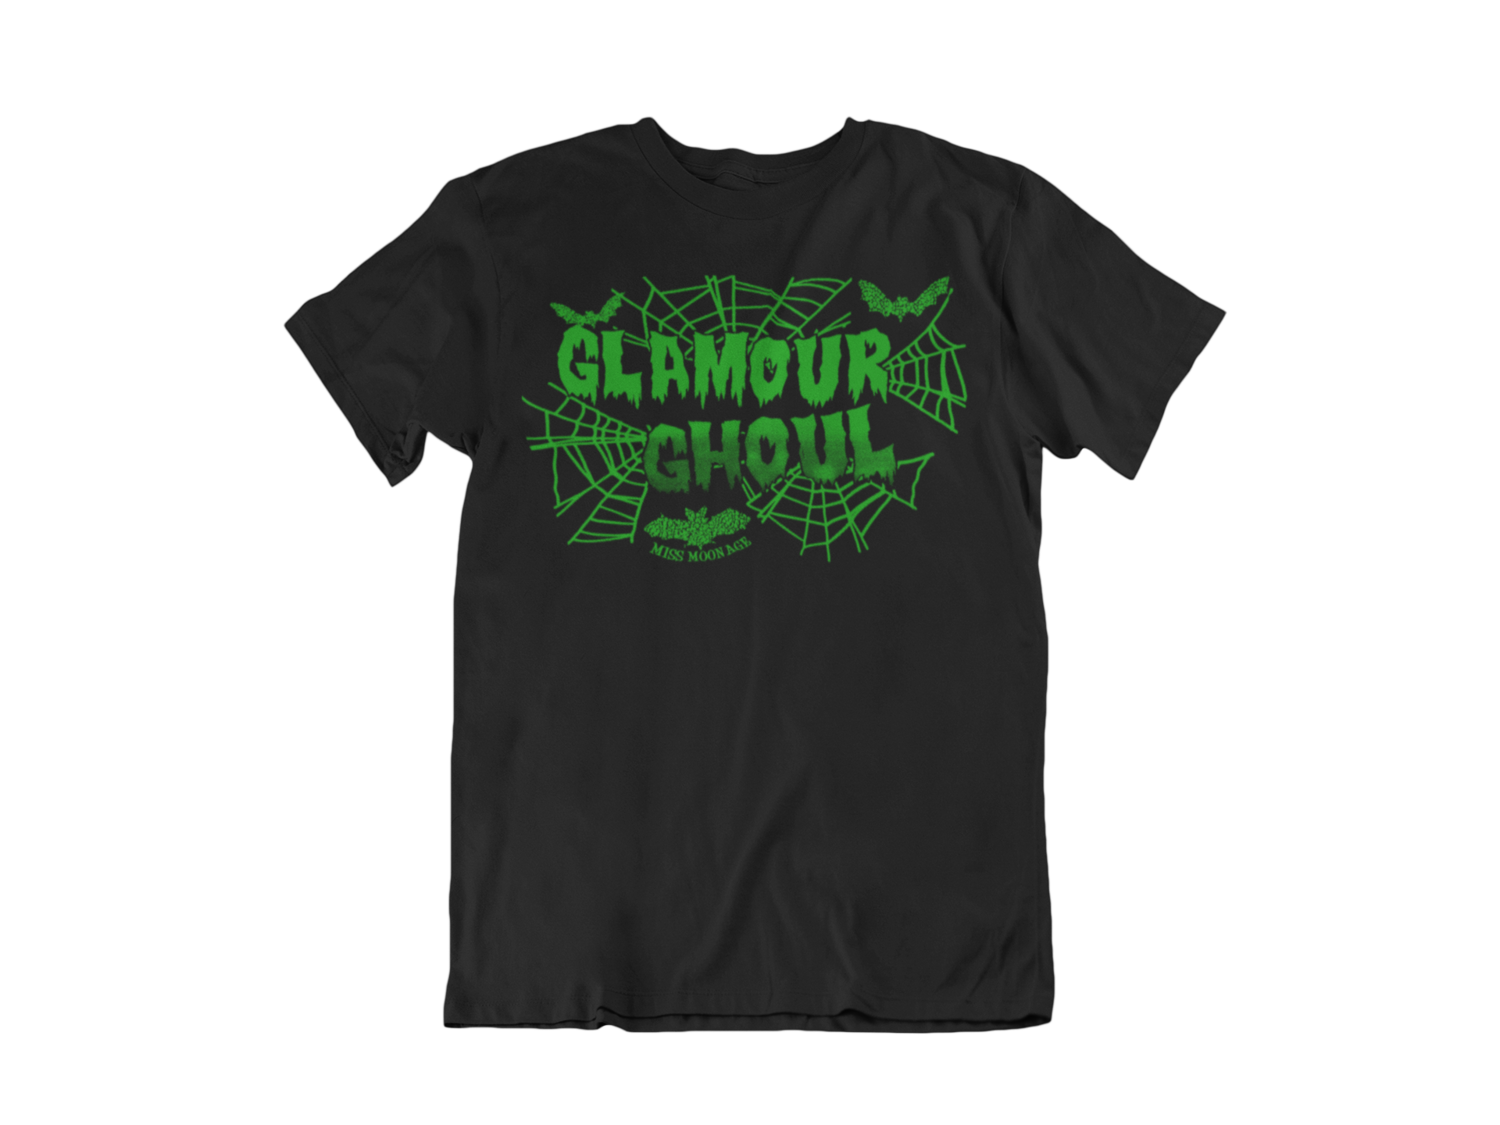 GLAMOUR GHOUL by MISS MOONAGE tshirt for MEN